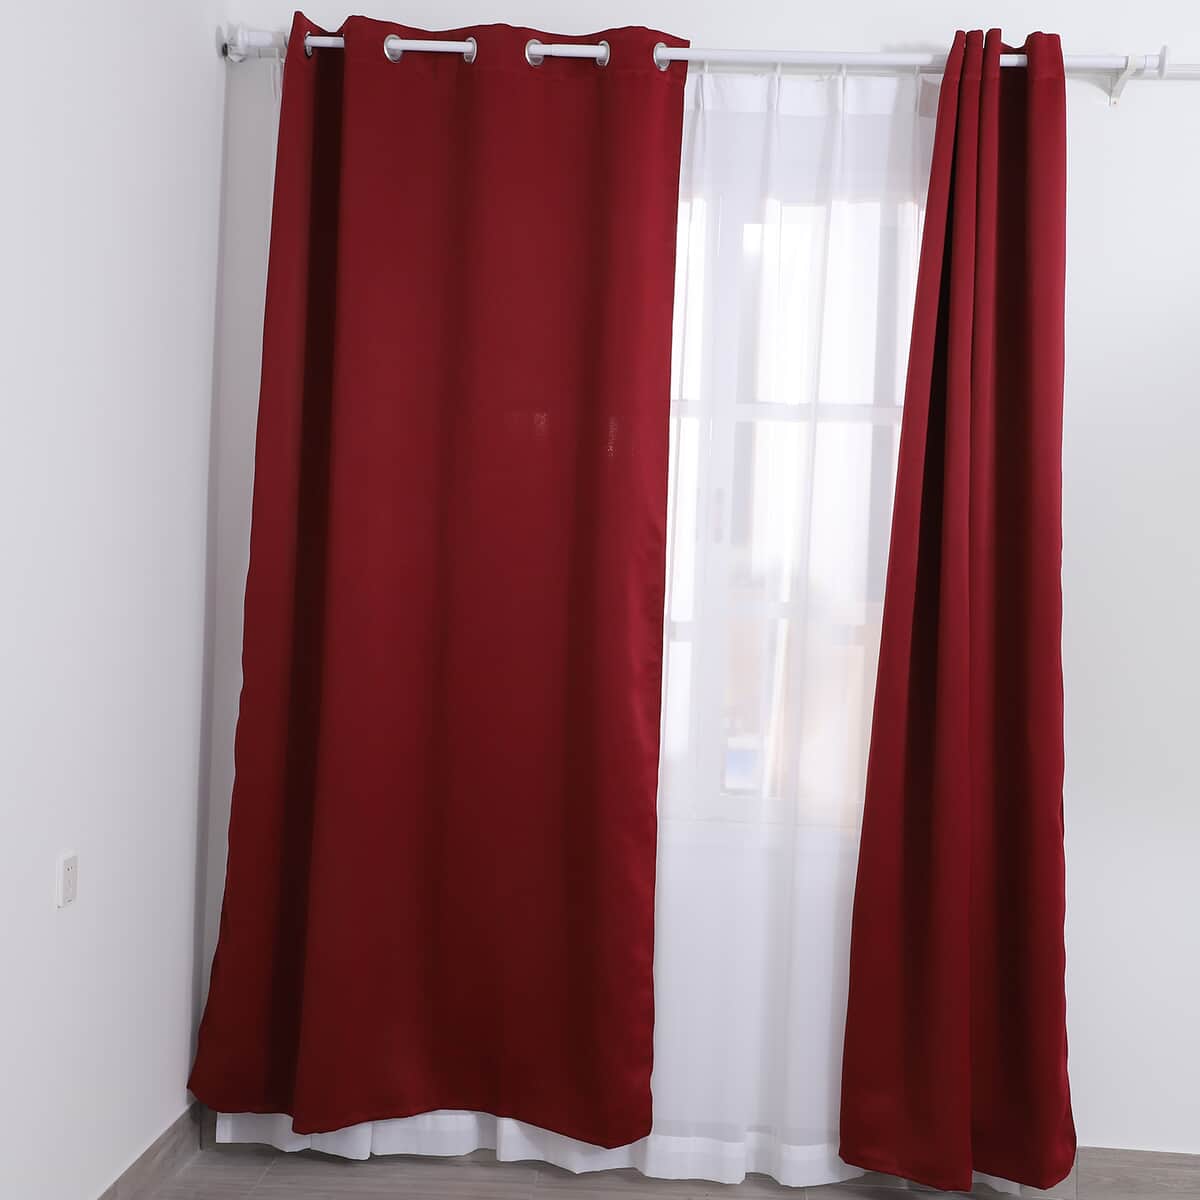 Set of 2 Burgundy Solid Blackout Curtain with 8 Metal Rings image number 1